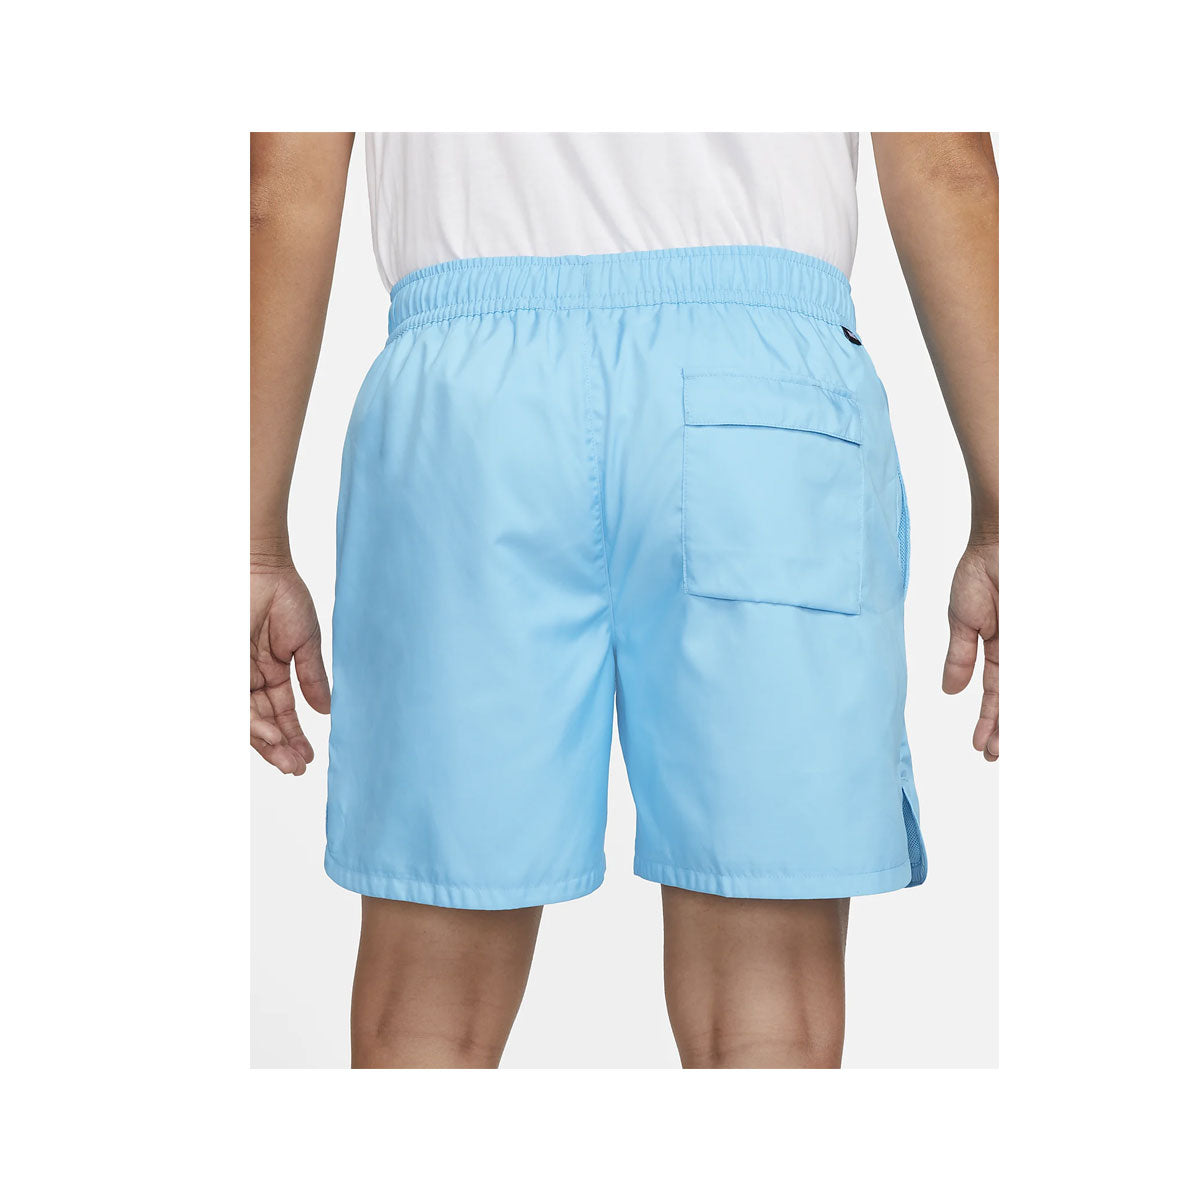 Nike Men's NSW Essentials Lined Flow Shorts